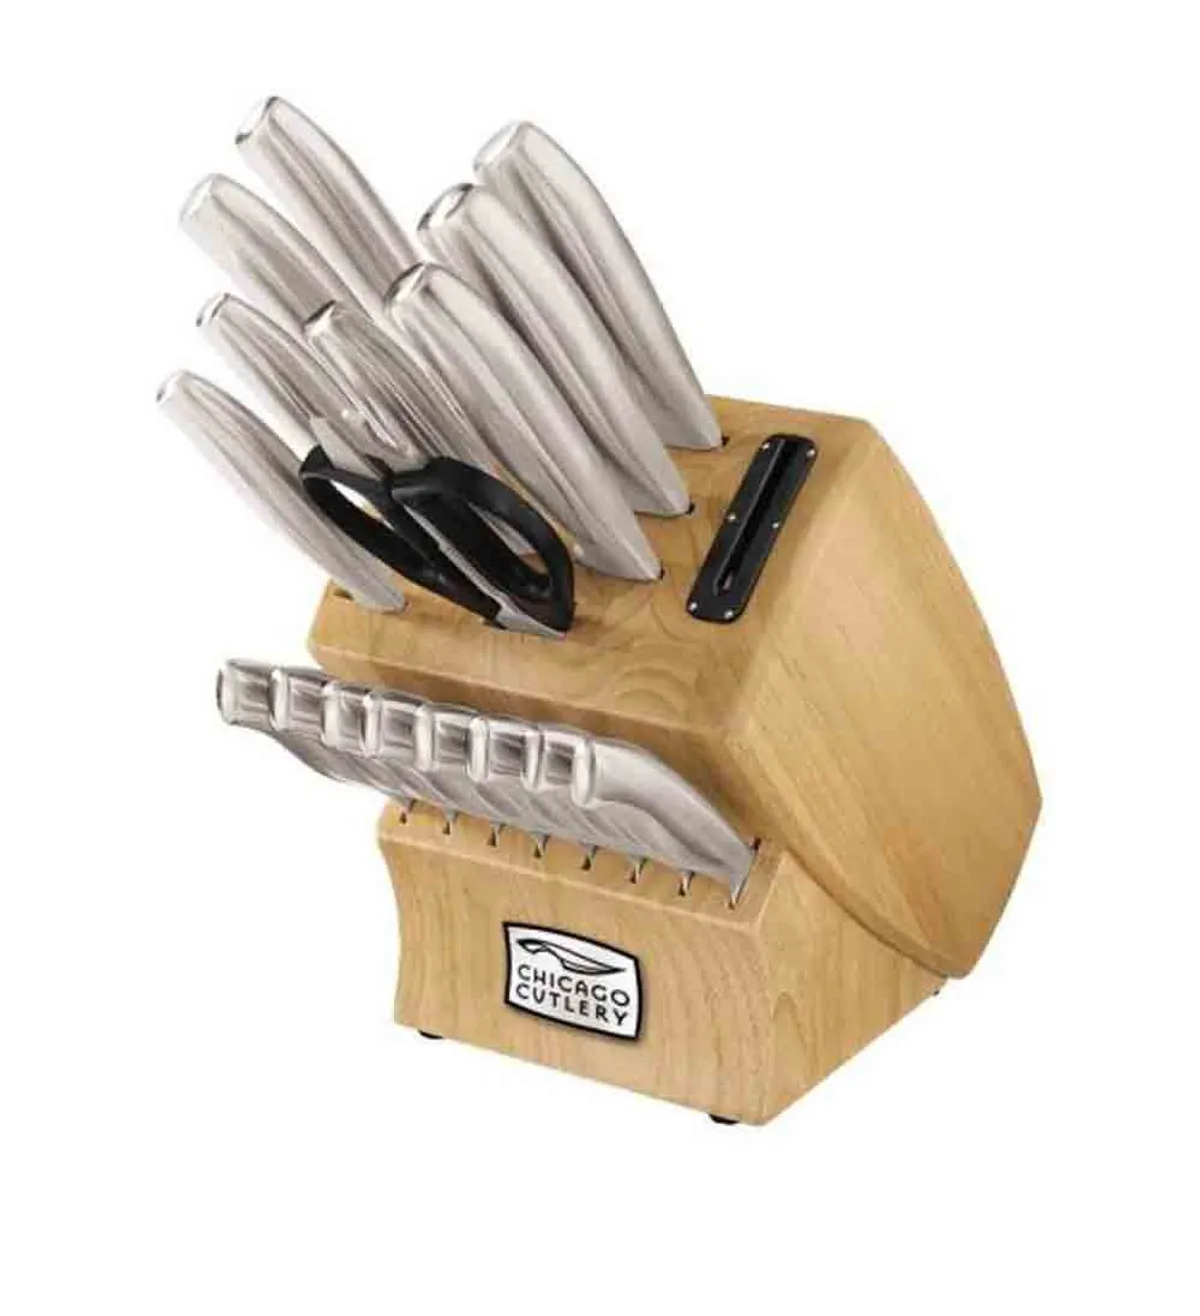 Chicago Cutlery 18 Piece Steel Knife Set Review